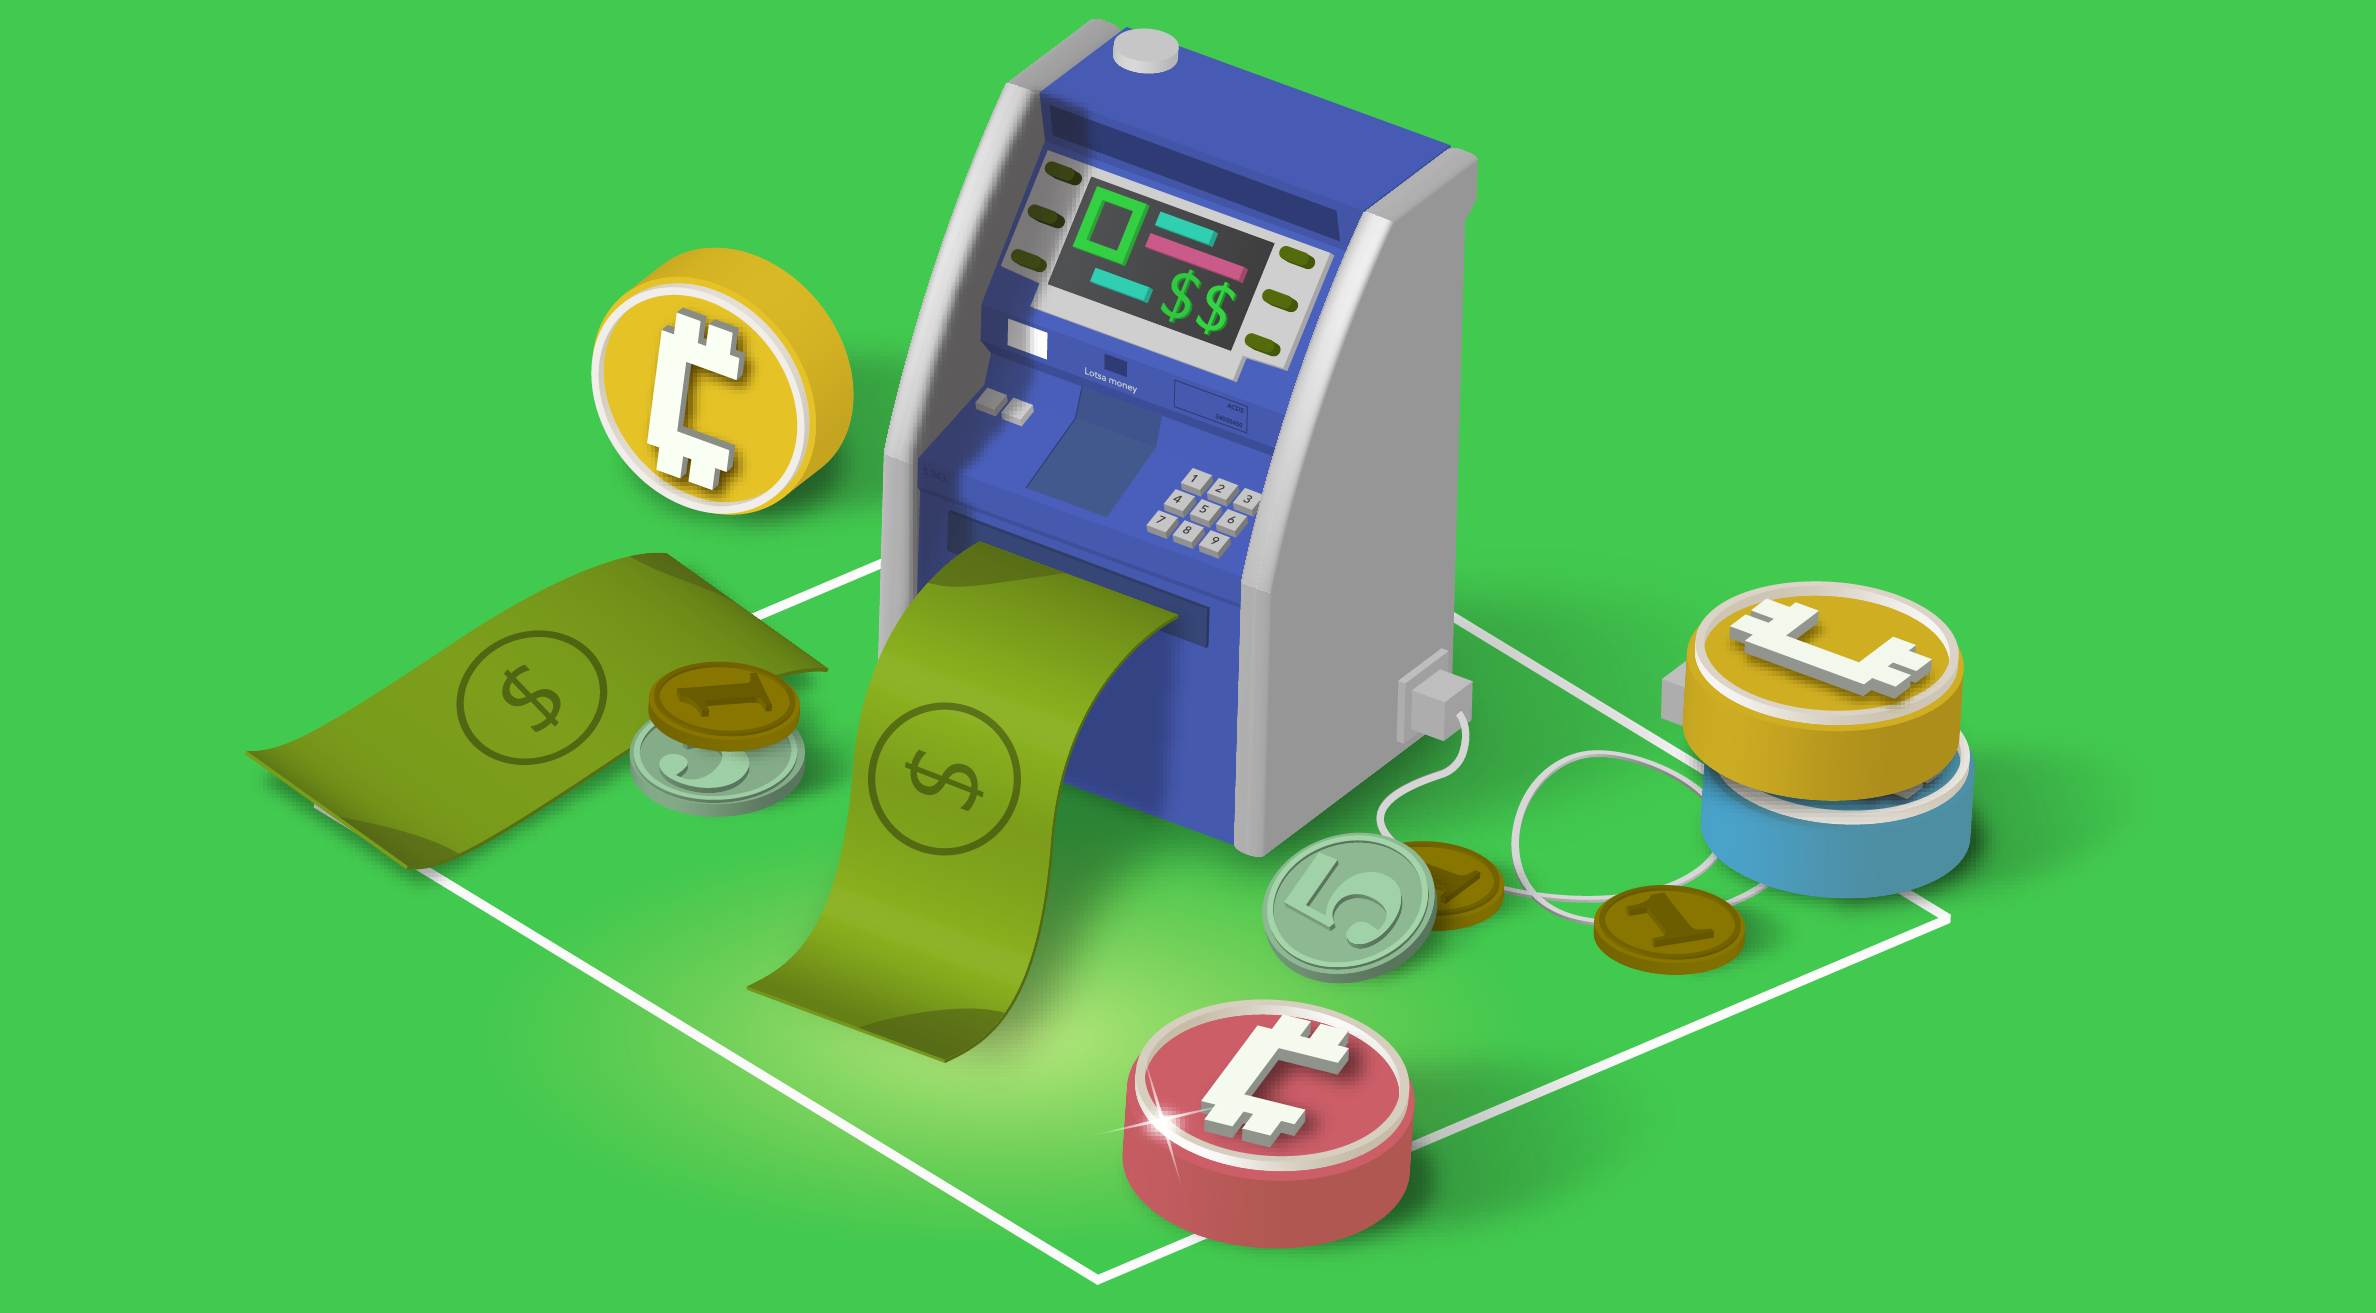 The information below describes how cryptocurrency works and the differences of cryptocurrency vs. cash.